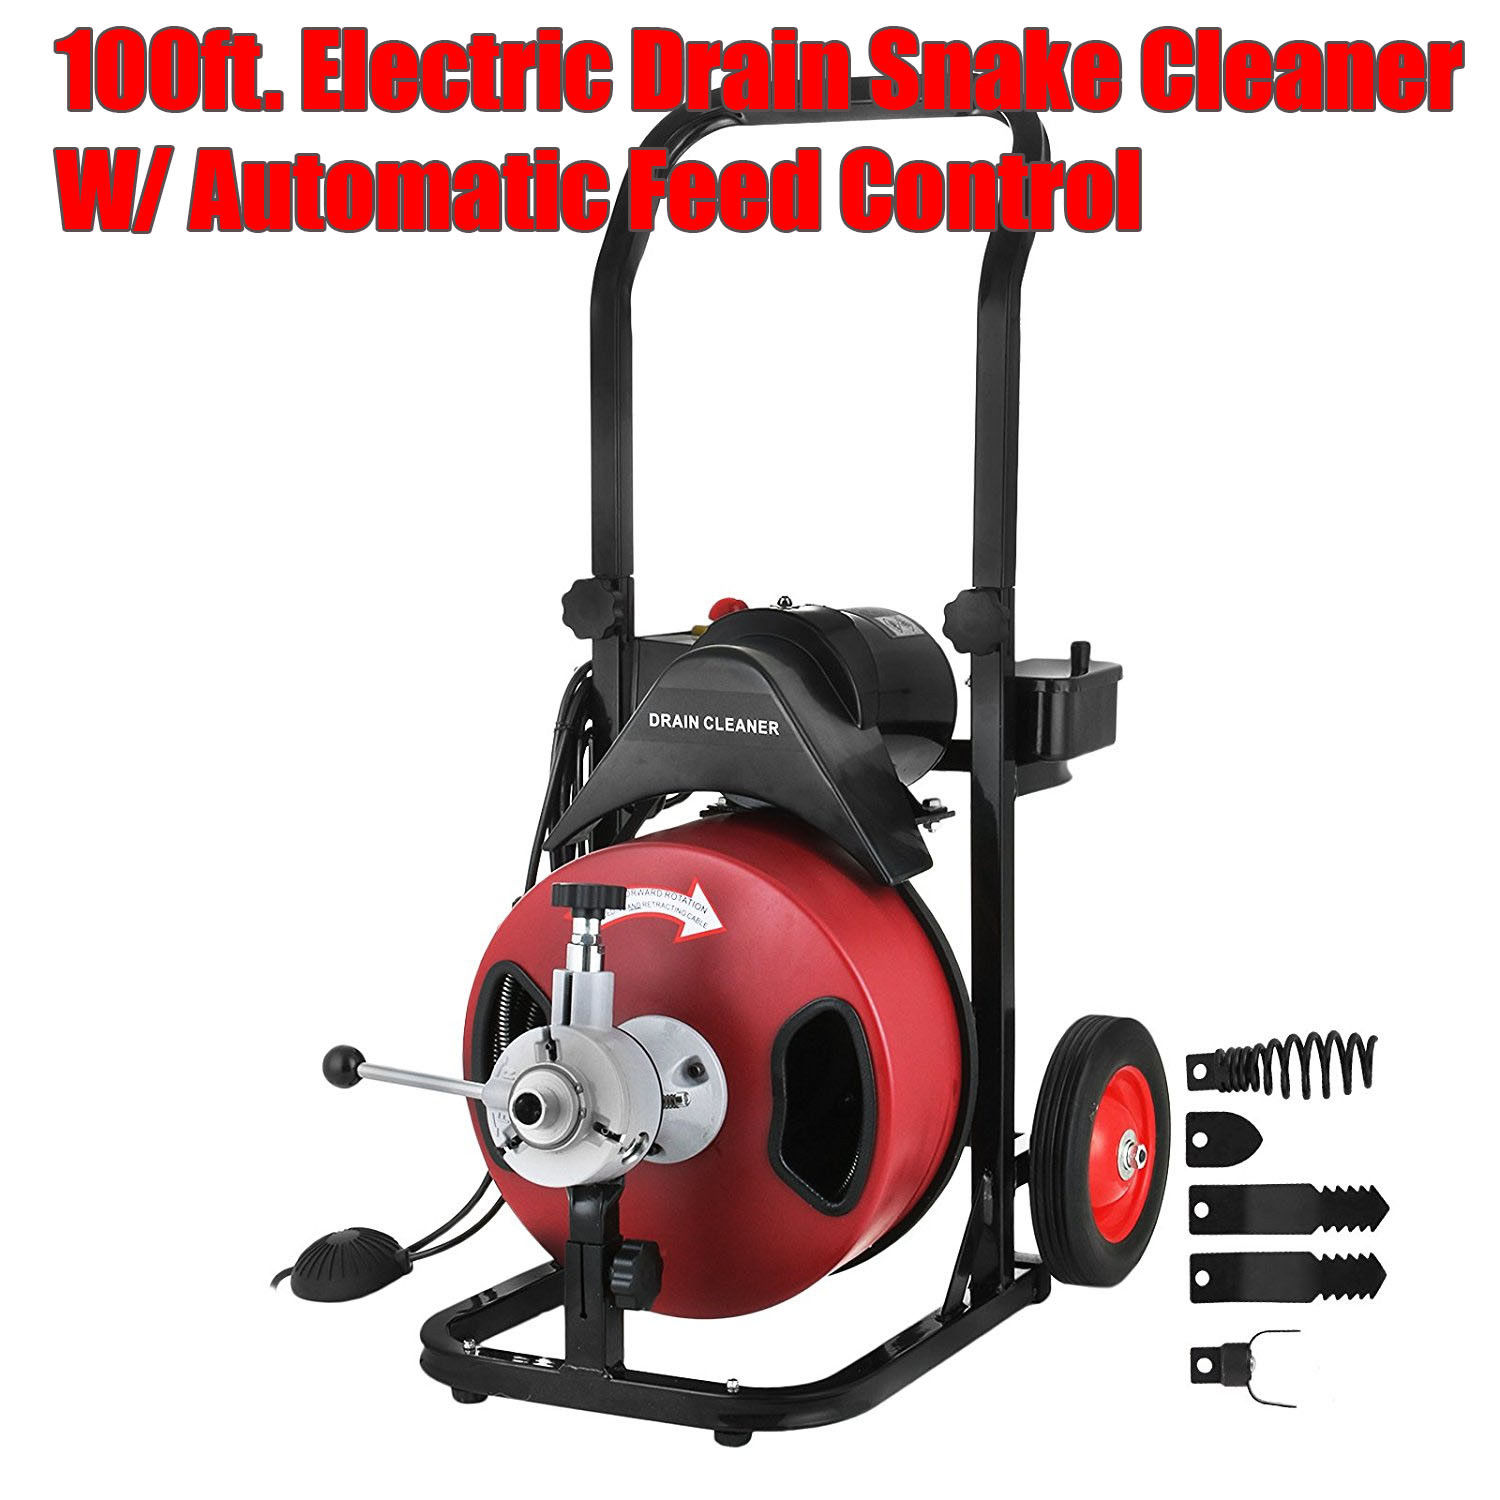 HOC D-330ZK POWER FEED DRAIN CLEANER 75 FOOT DRAINER CLEANER 30 DAY WARRANTY 